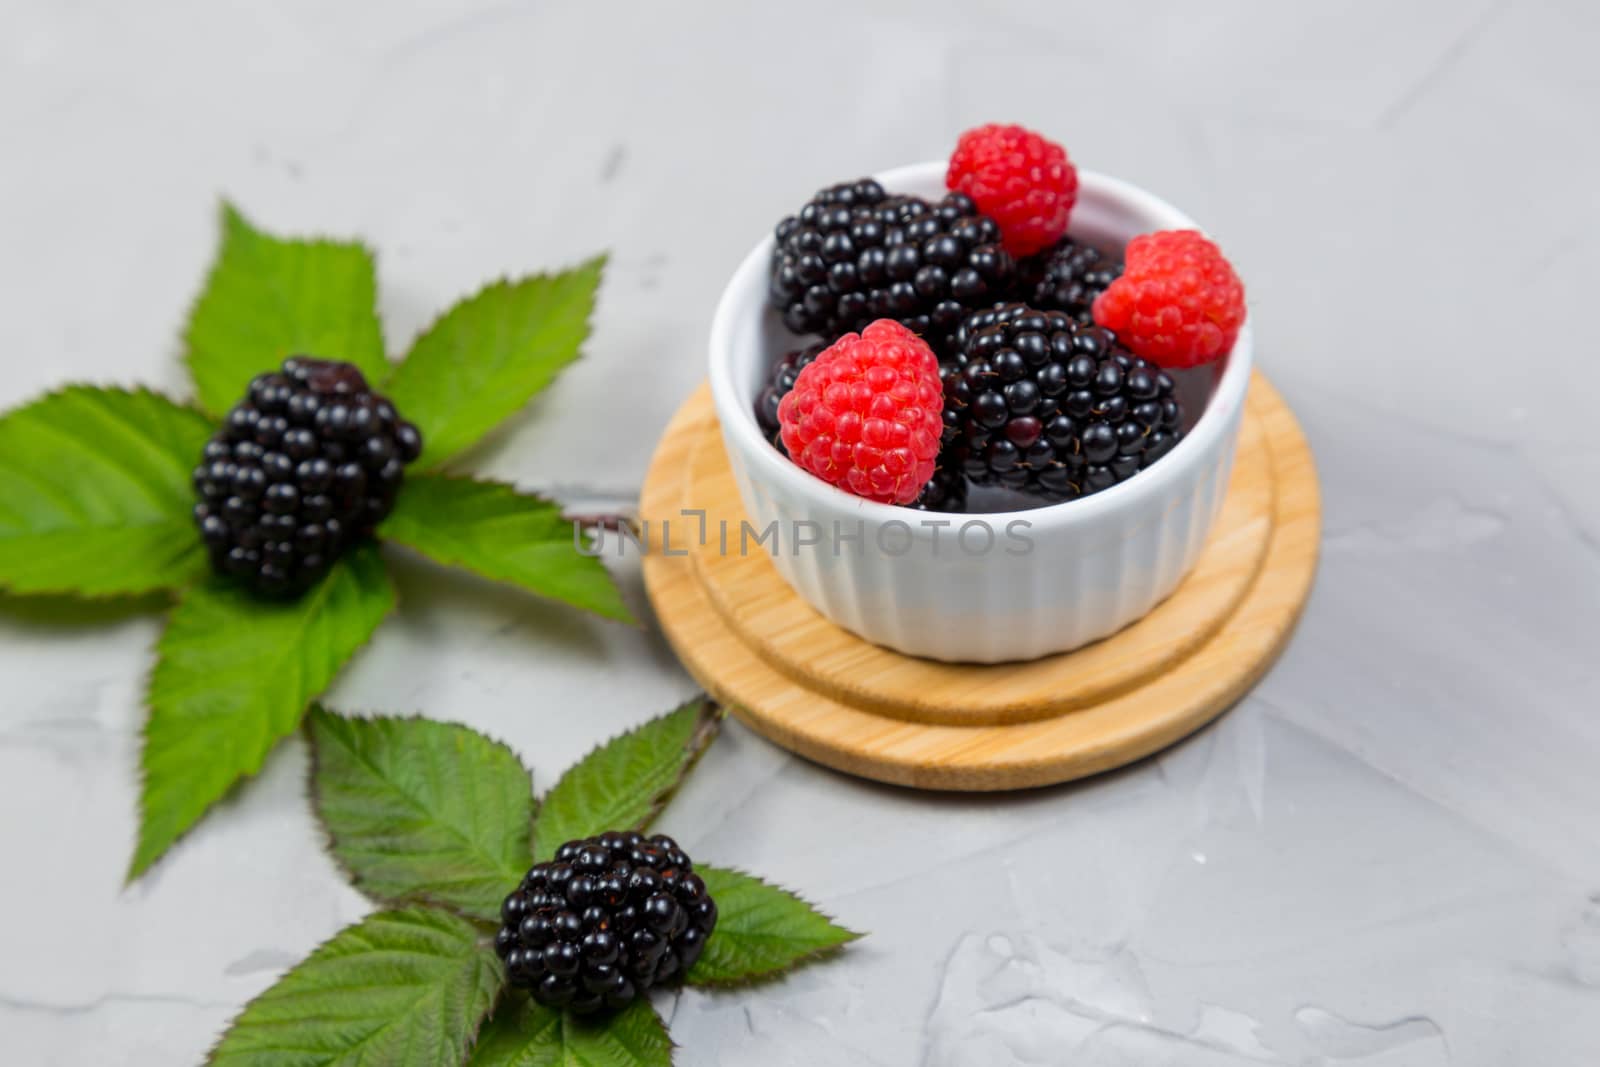 ripe blackberry with leaves on a wooden cutting board in a white ceramic plate on concrete background